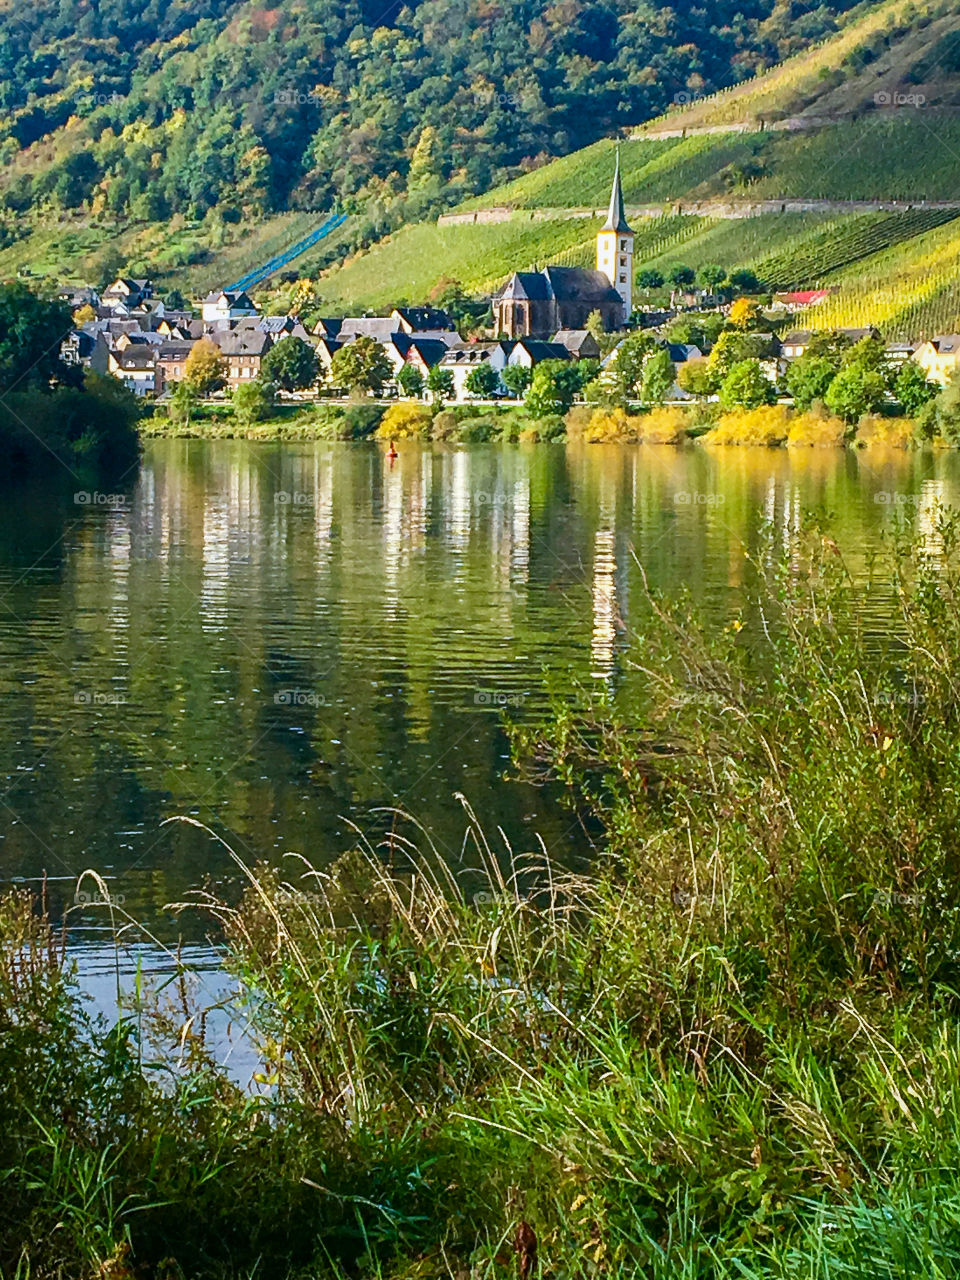 Moselle River and Village Bremm Germany 